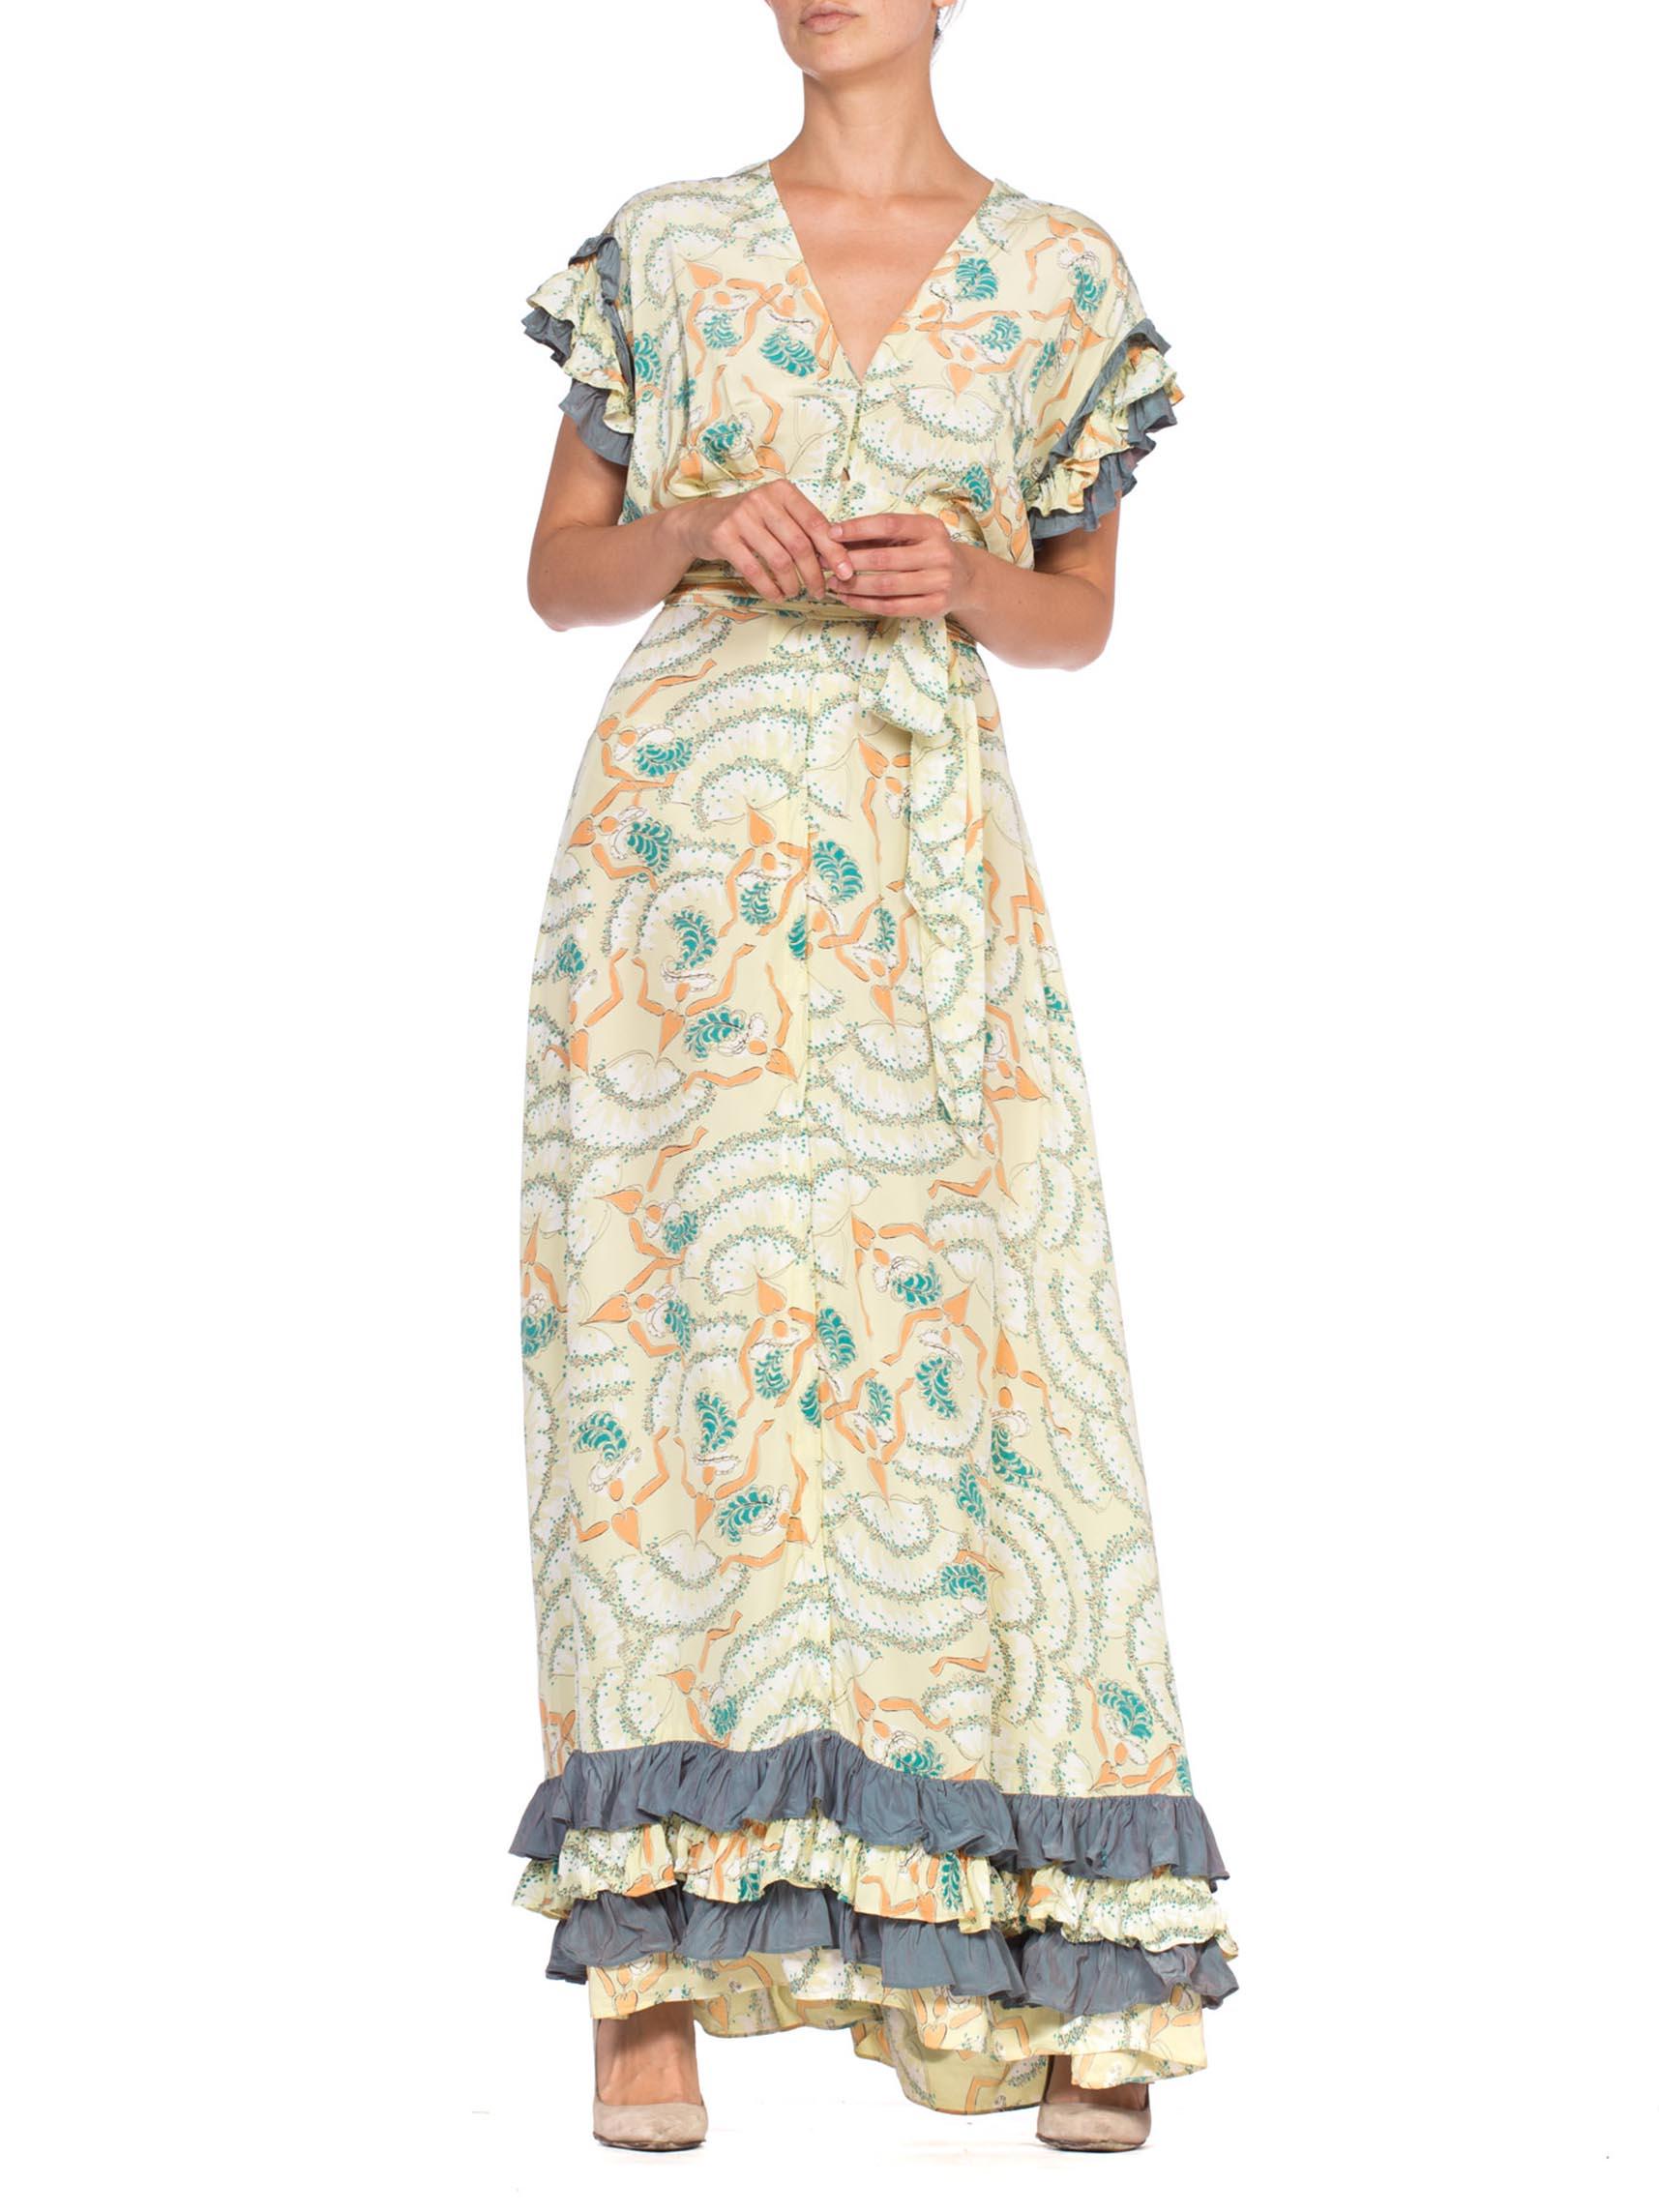 Women's 1940'S Can-Can Dancer Novelty Print Cold Rayon Gown With Ruffles Dress